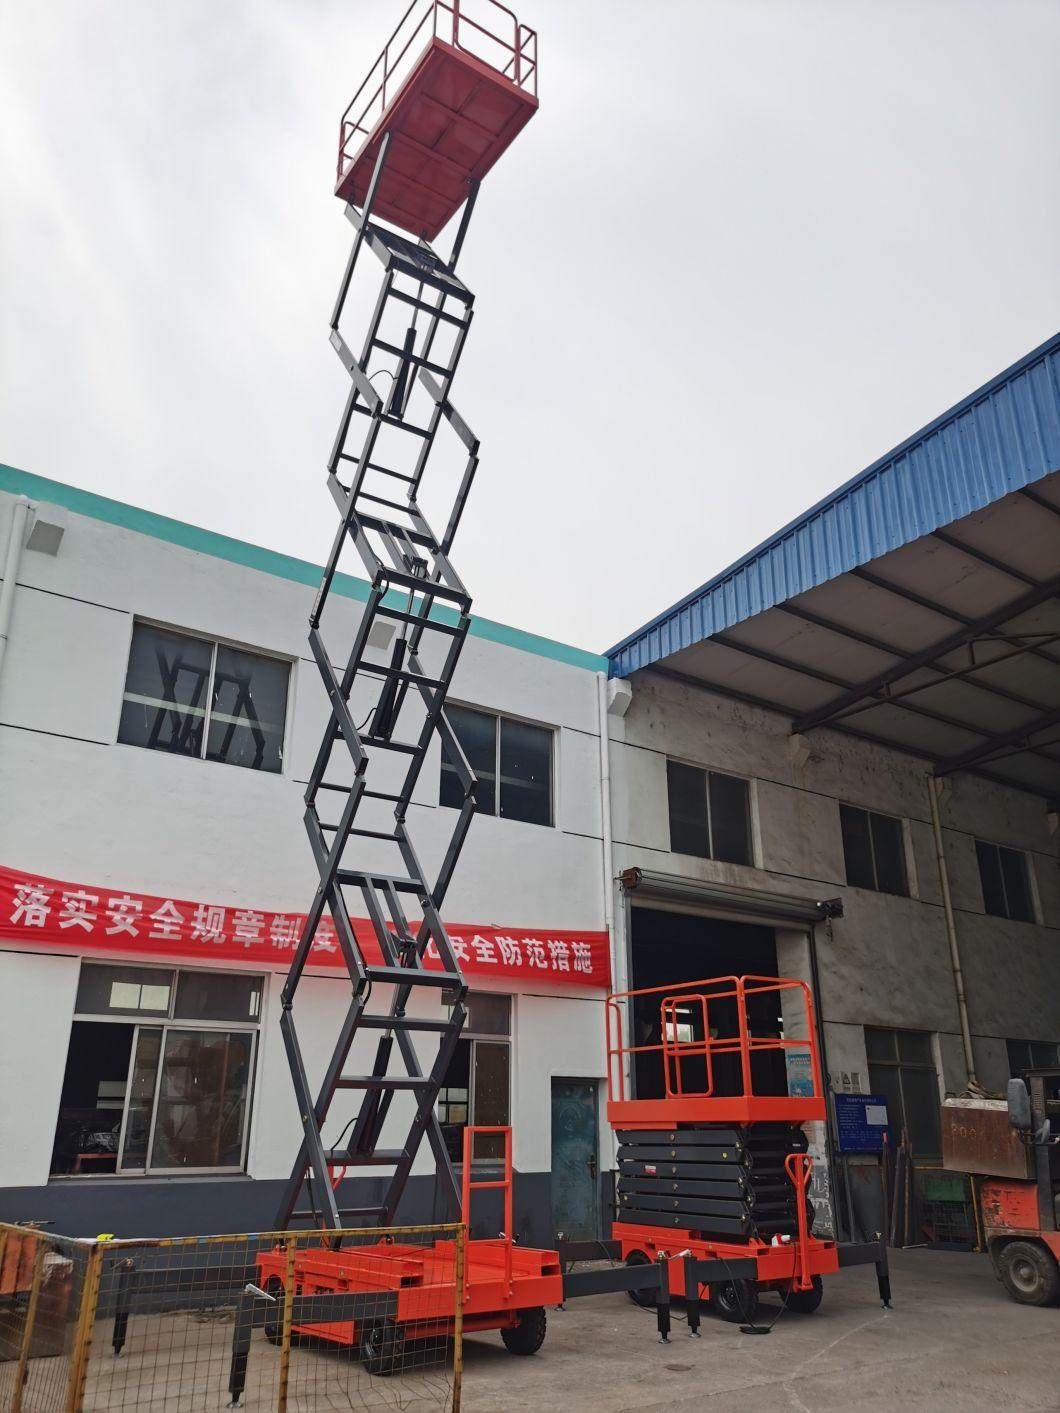 China Supplier Semi Electric Scissor Lift for Outdoor Engineering